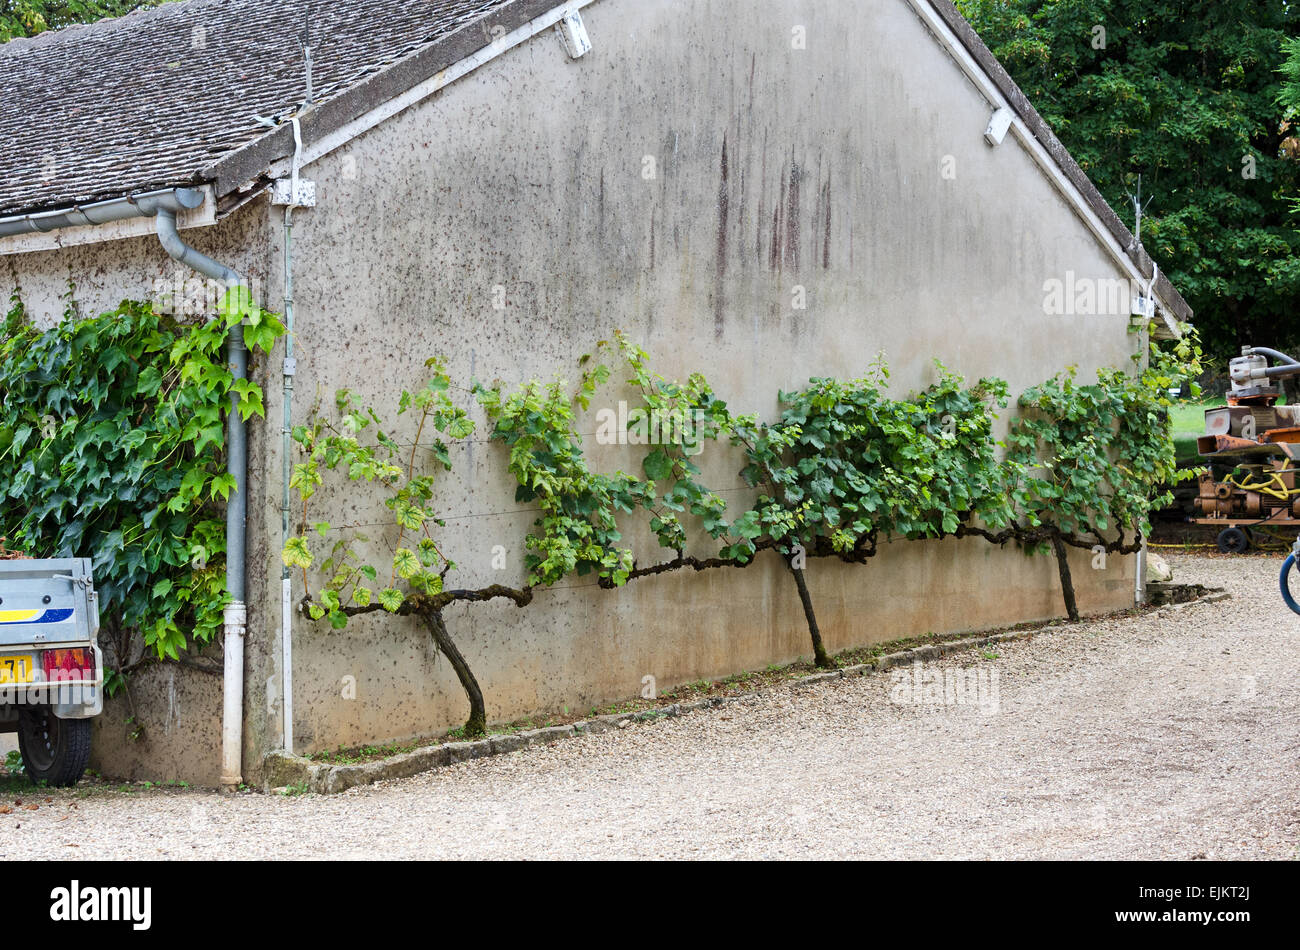 Grapevines espaliered on an outbuilding at Domaine de la Folie, near Chagny in the Côte Chalonnaise of Burgundy, France. Stock Photo